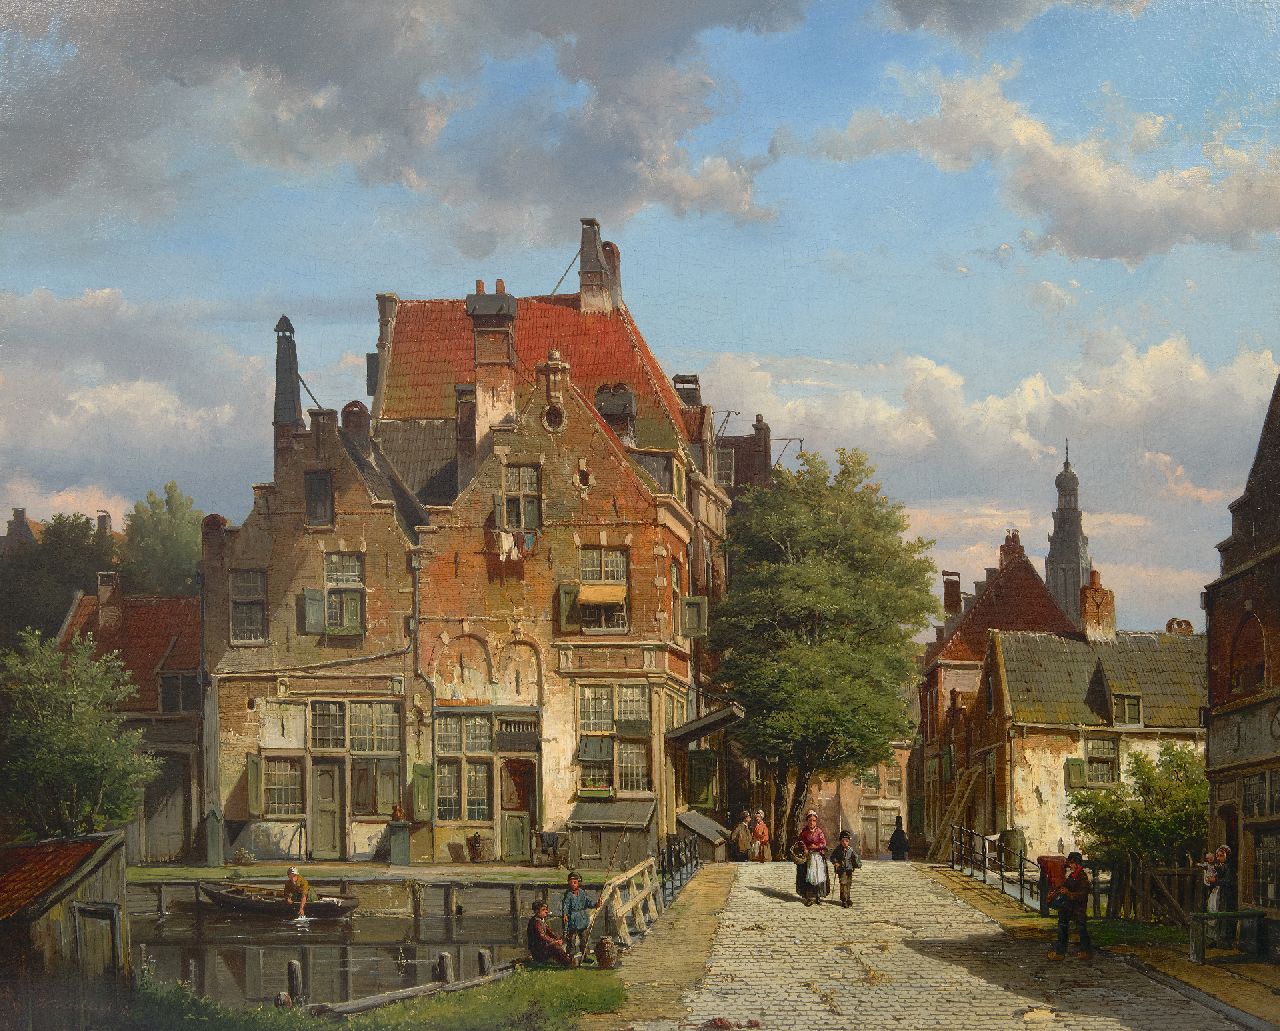 Koekkoek W.  | Willem Koekkoek | Paintings offered for sale | View of a Dutch street with a bridge over a canal, oil on canvas 67.4 x 82.3 cm, signed l.l. and dated '66